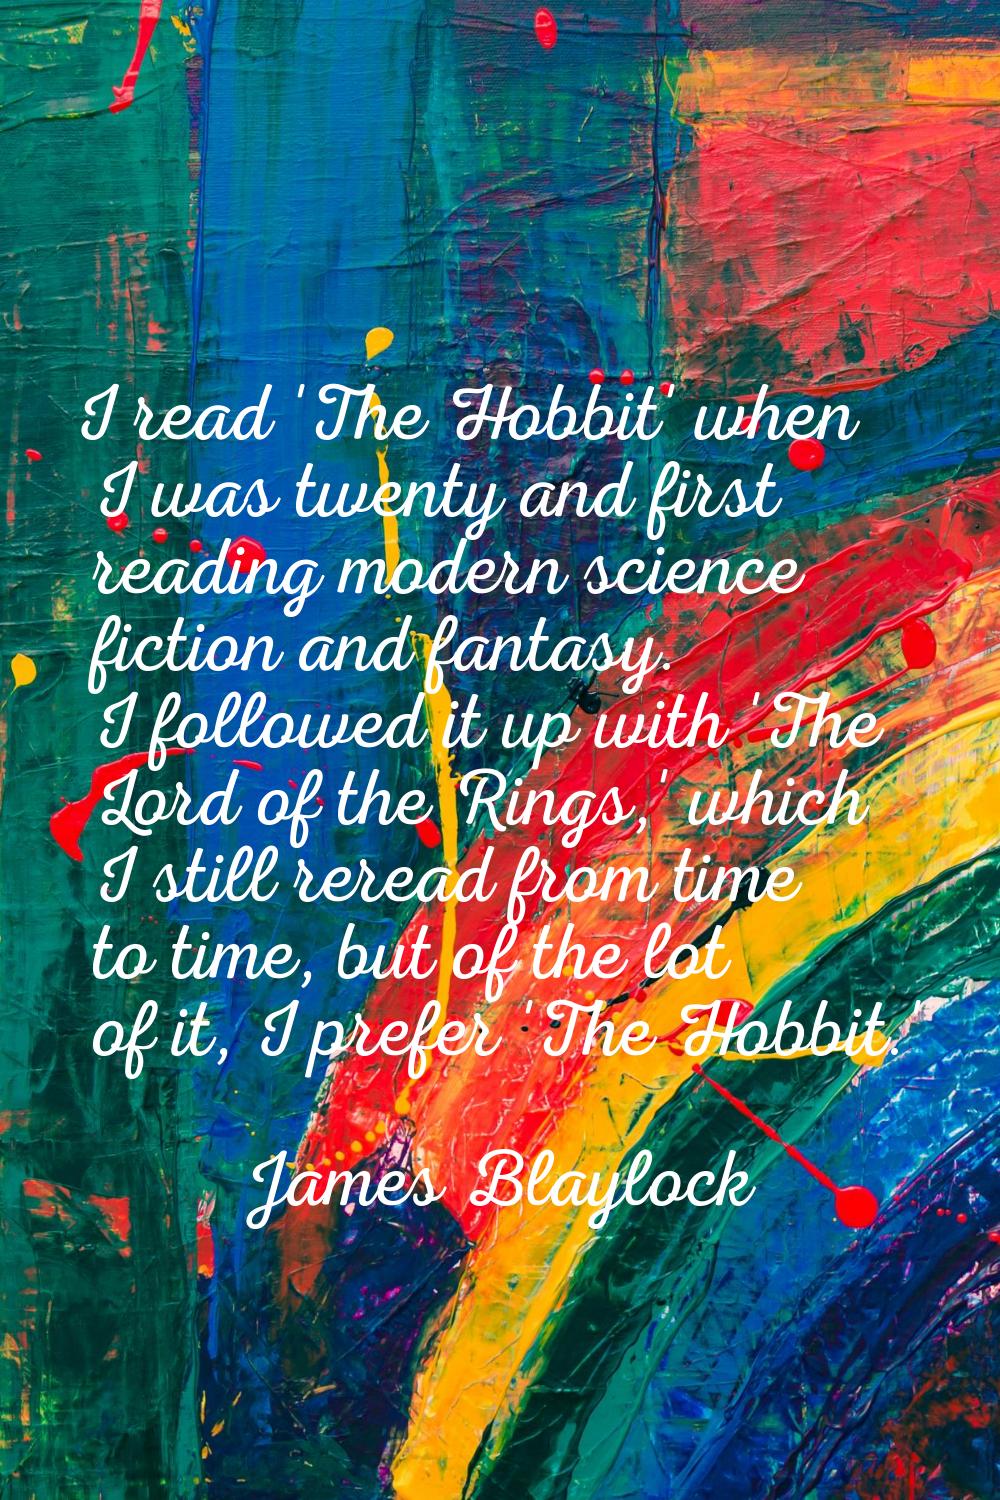 I read 'The Hobbit' when I was twenty and first reading modern science fiction and fantasy. I follo